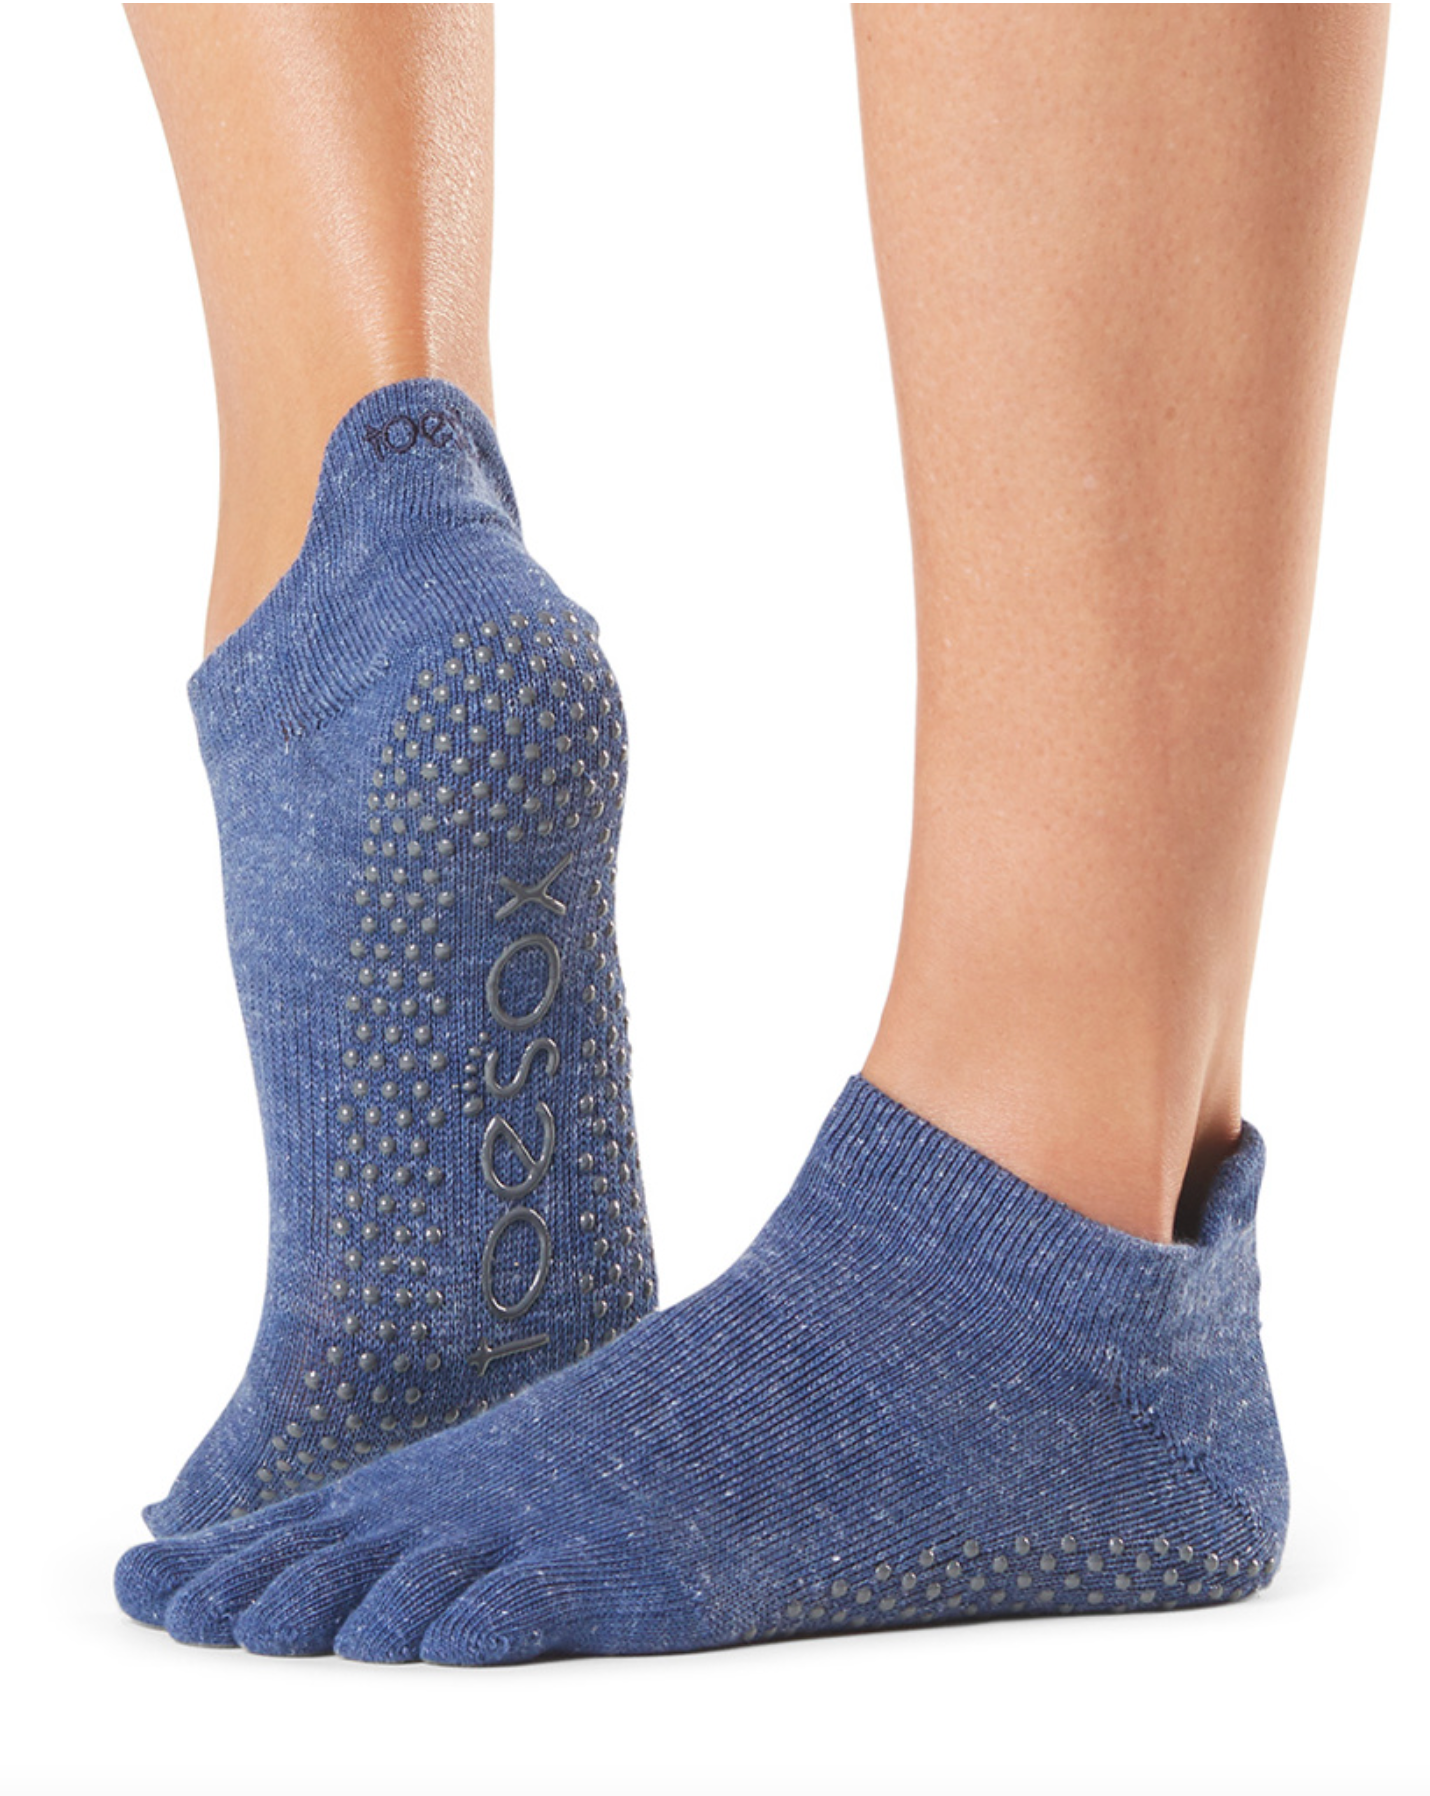 ToeSox Low Rise Full toe - light fleck navy blue toe socks with gripper sole, perfect for pilates and yoga